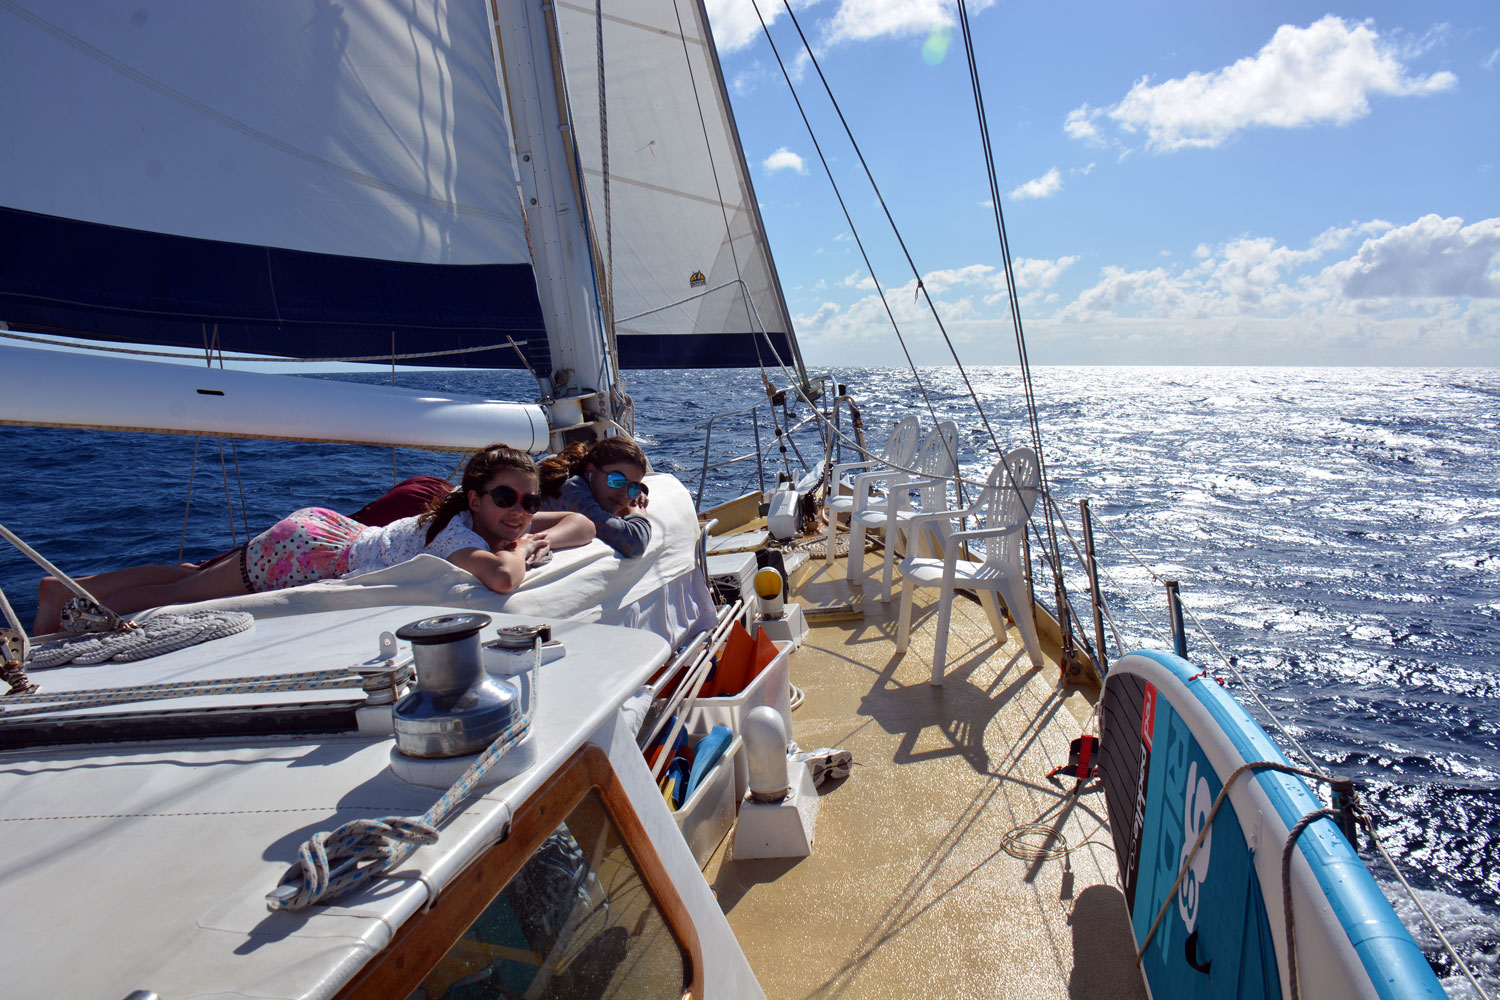 Escape Winter & Explore the Whitsundays & Great Barrier Reef on a Luxurious Live-Aboard Yacht